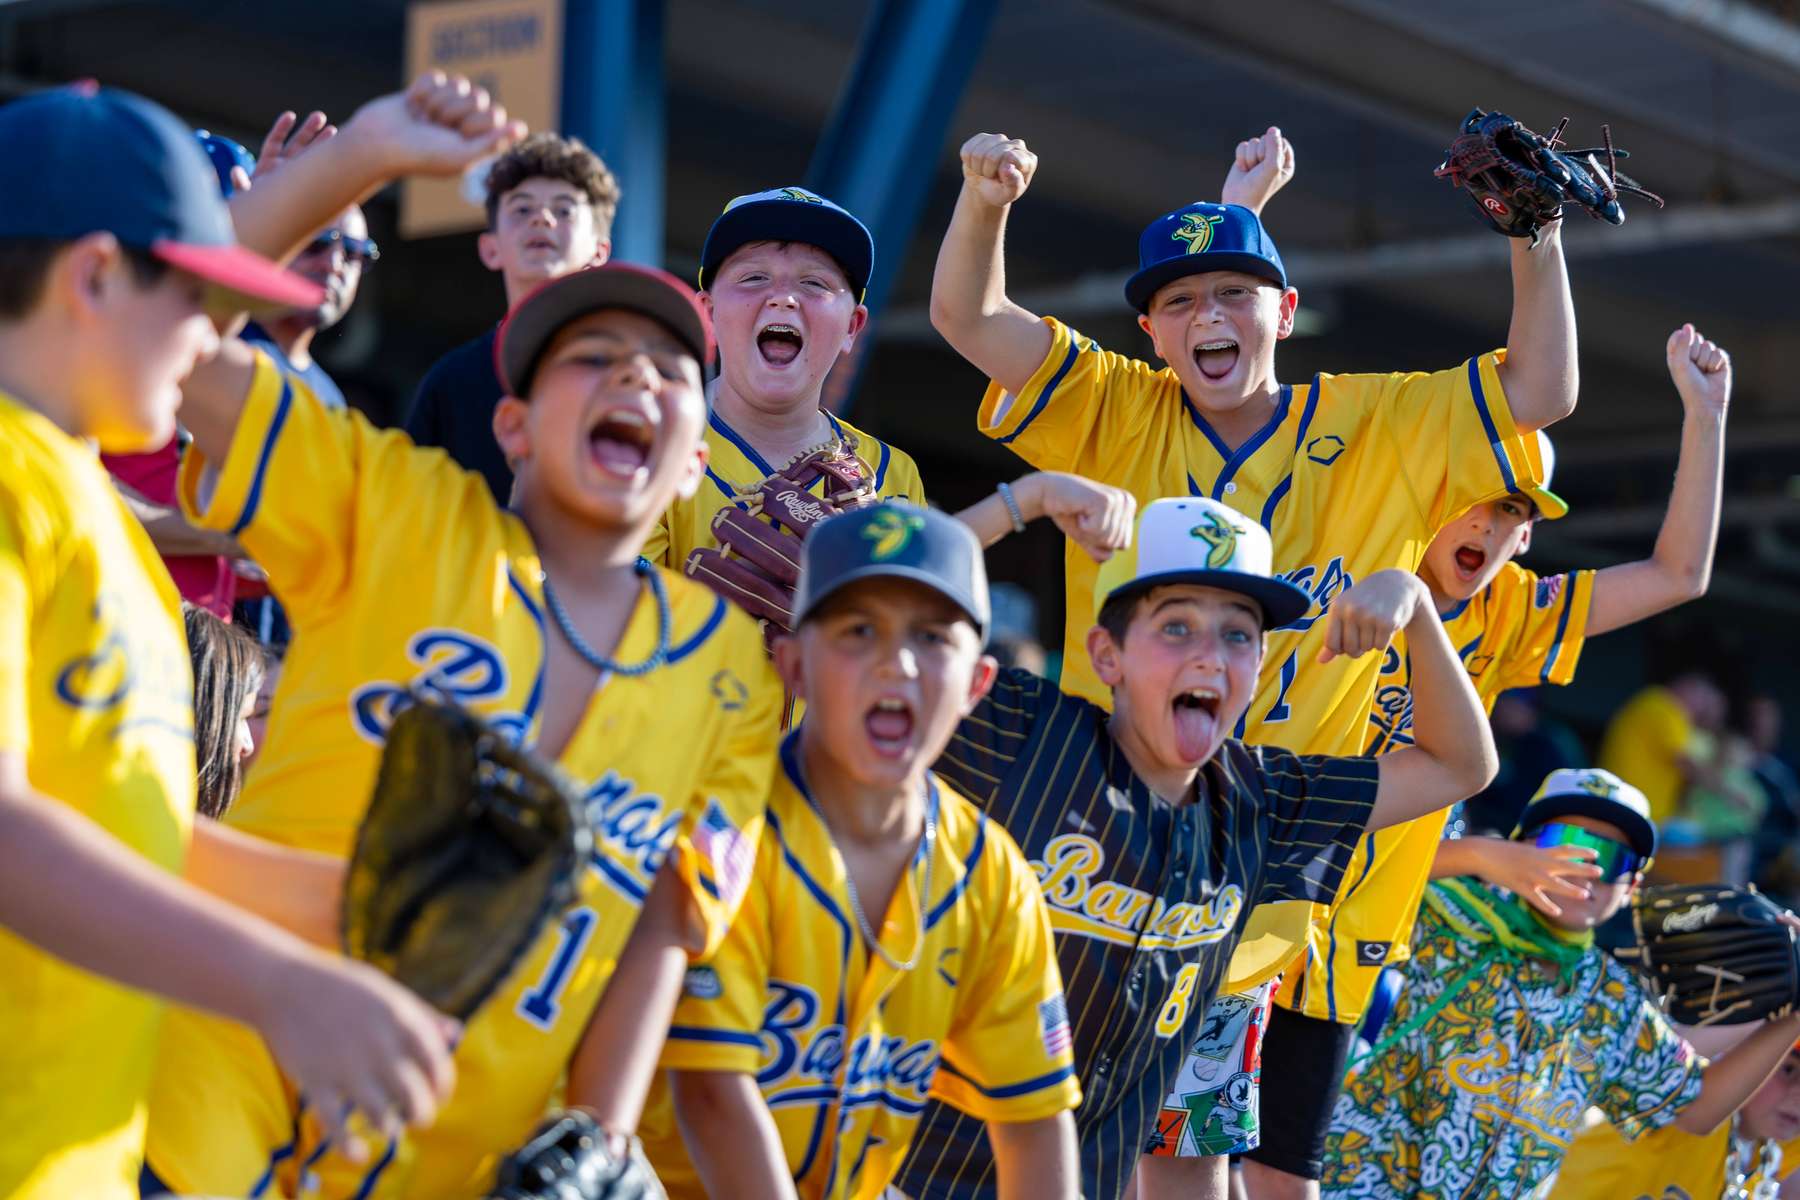 Fans cheer on the Savannah Bananas during their game against the Staten Island Ferryhawks at Richmond County Bank Ball Park on August 11, 2023 in New York City.